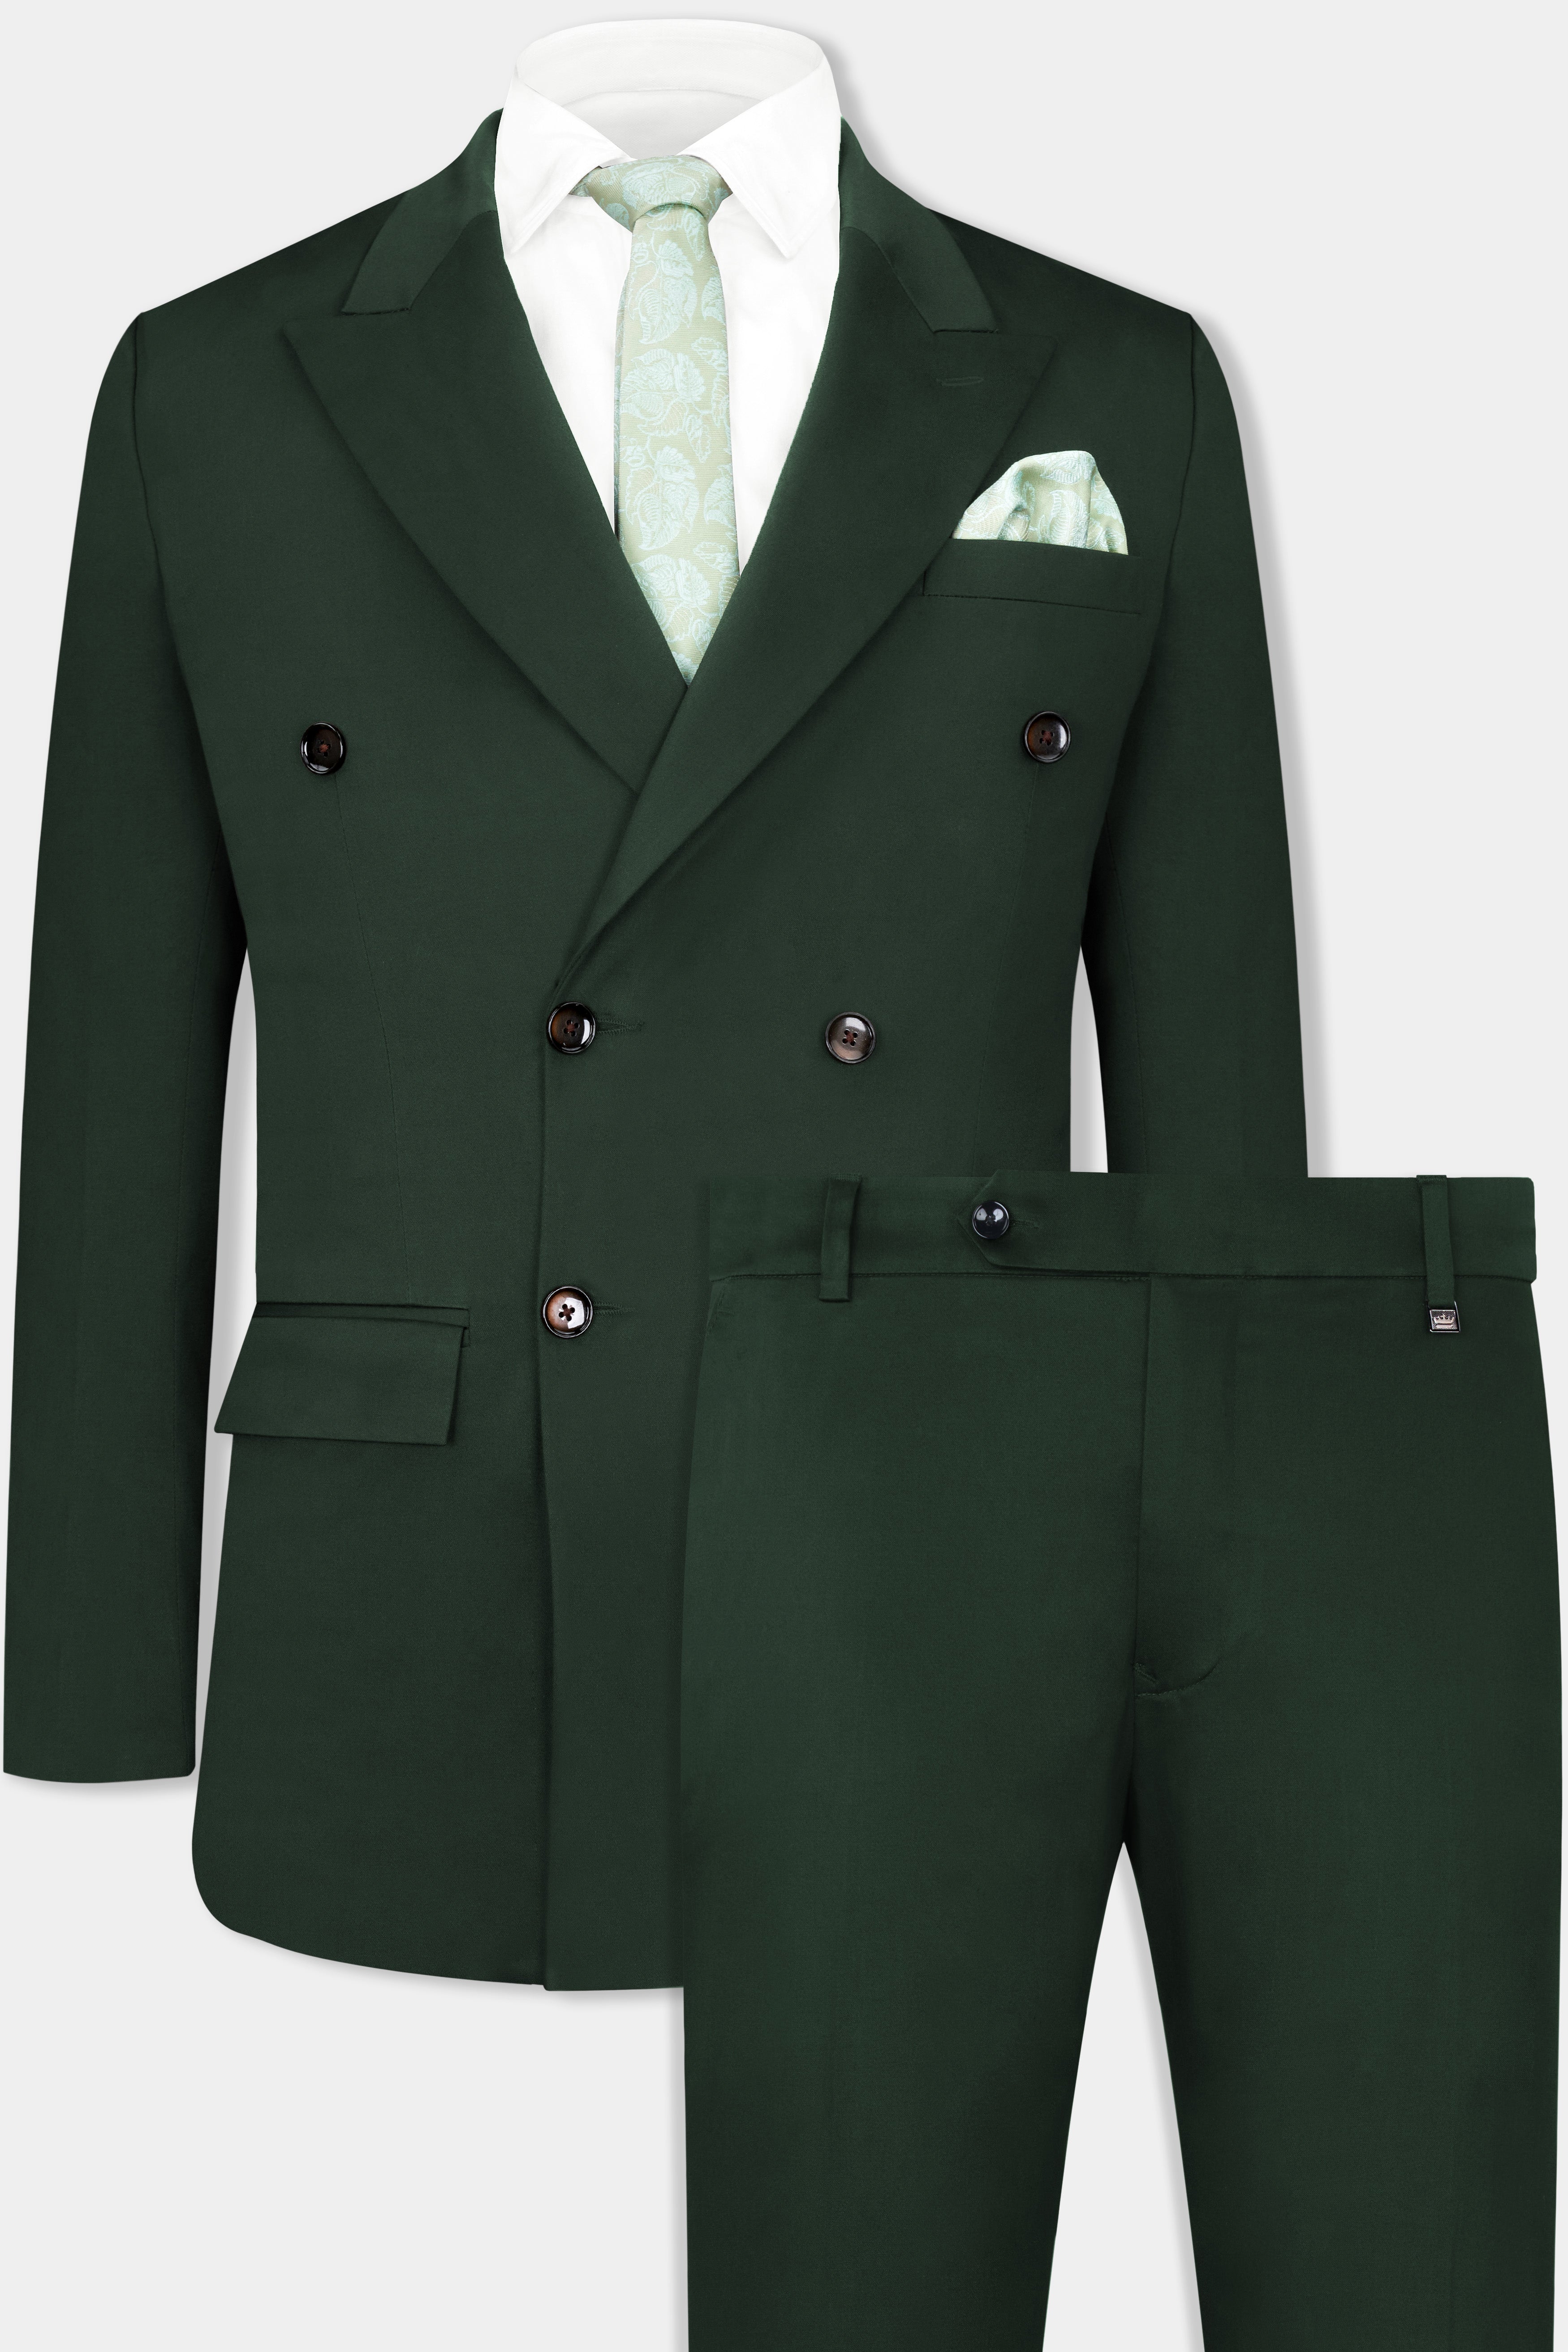 Heavy Metal Green Double Breasted Premium Cotton Stretchable traveler Suit ST2773-DB-36, ST2773-DB-38, ST2773-DB-40, ST2773-DB-42, ST2773-DB-44, ST2773-DB-46, ST2773-DB-48, ST2773-DB-50, ST2773-DB-52, ST2773-DB-54, ST2773-DB-56, ST2773-DB-58, ST2773-DB-60